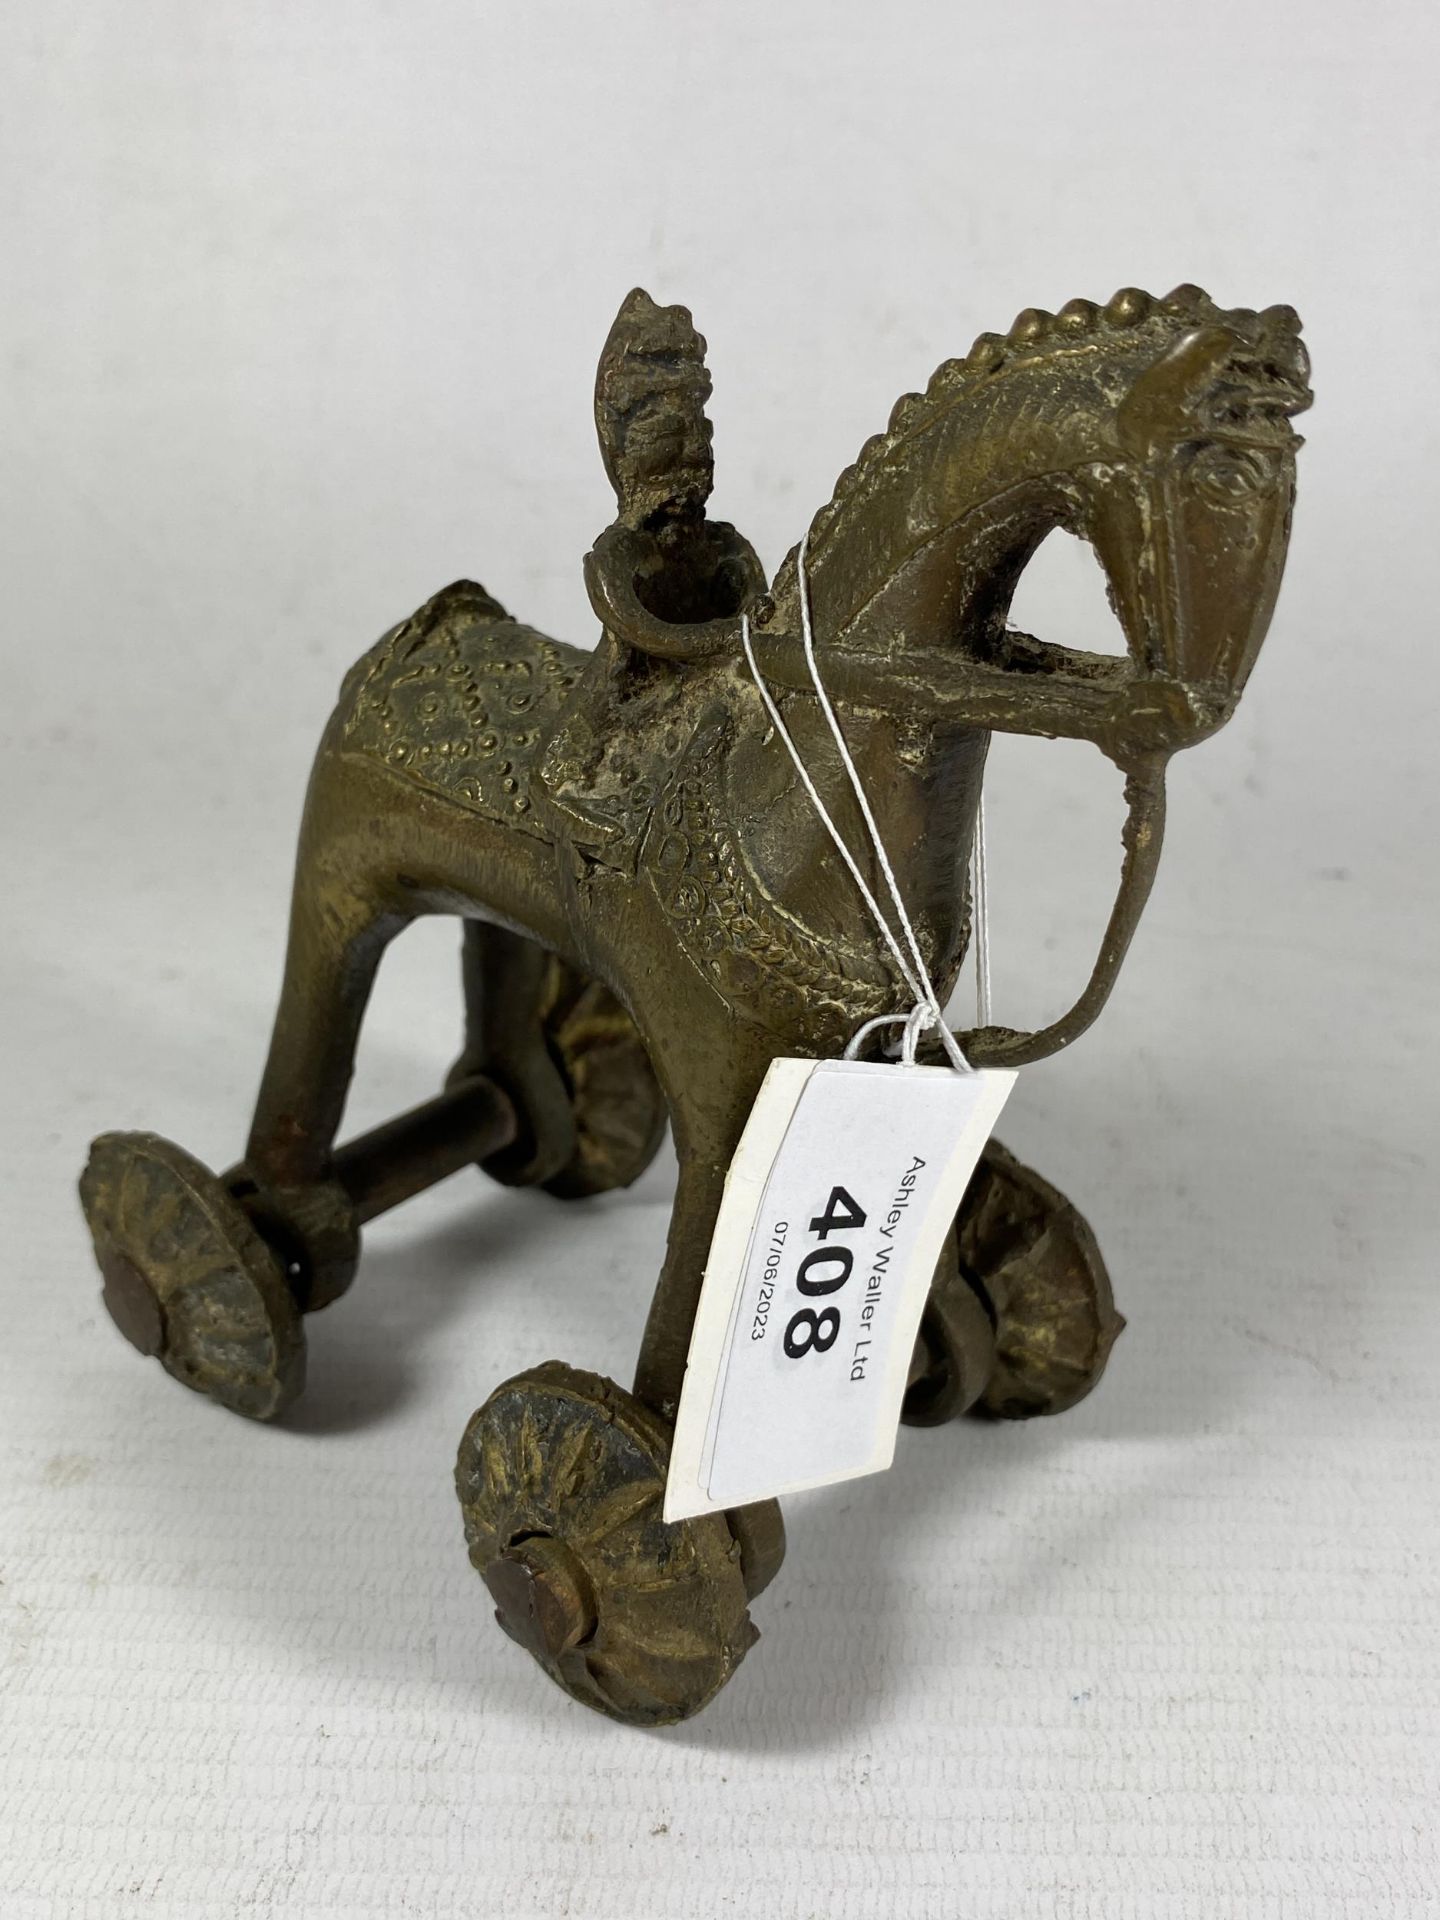 AN UNUSUAL 19TH CENTURY INDIAN METAL TEMPLE TOY MODEL OF A HORSE AND RIDER, HEIGHT 12CM - Image 2 of 4